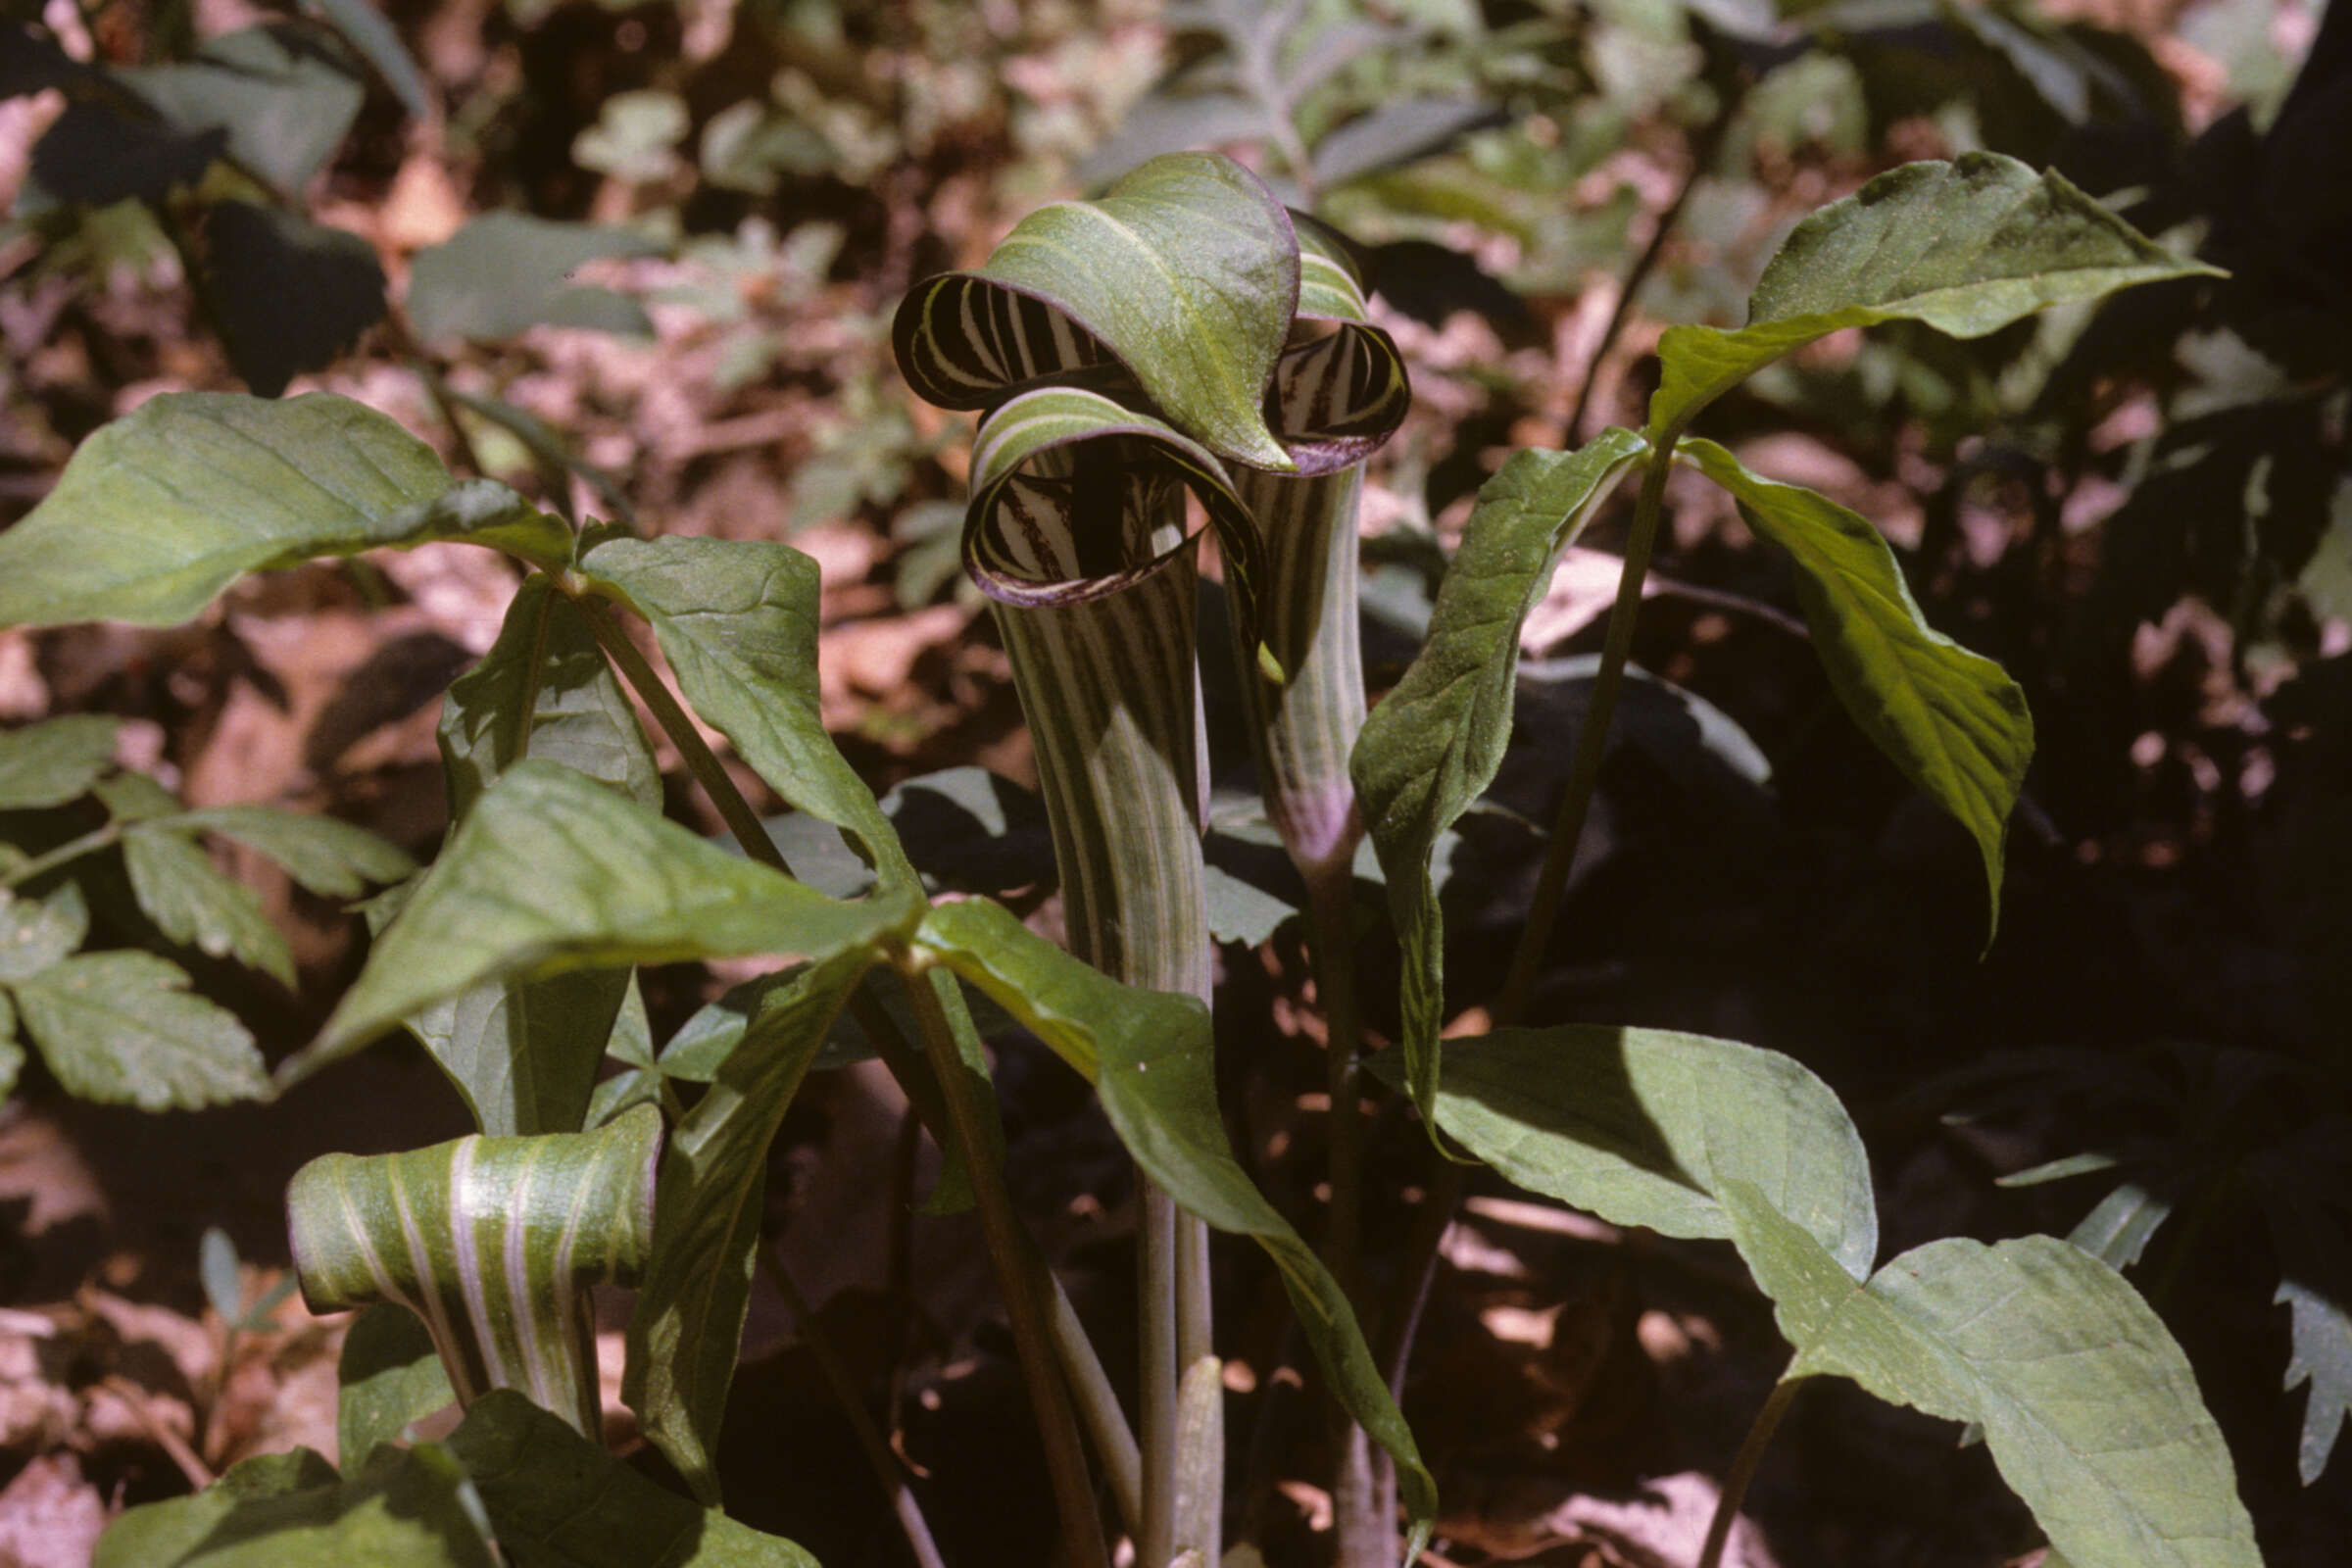 Image of Jack in the pulpit